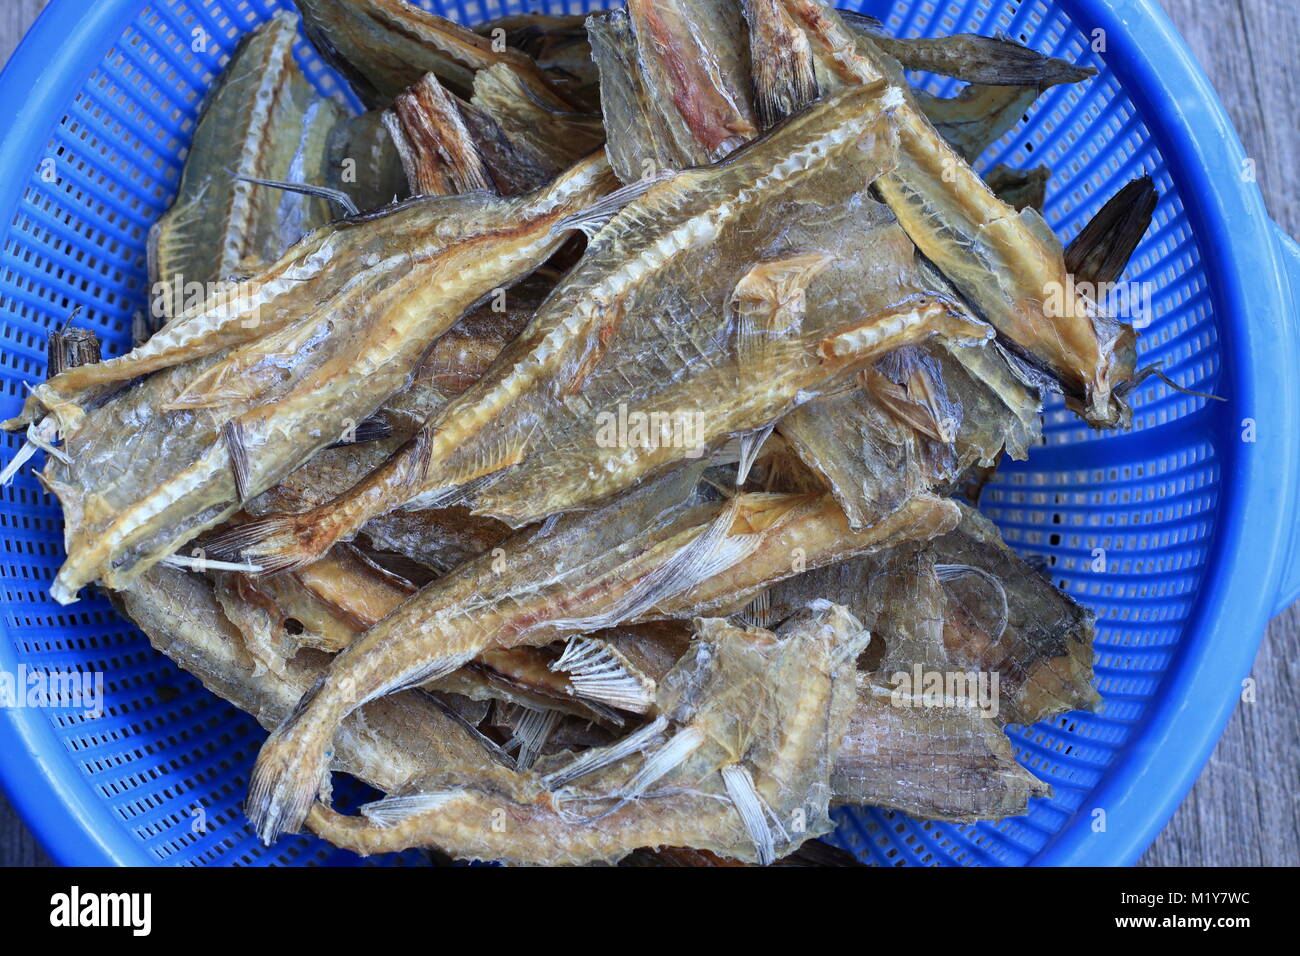 Close up of Dried Fish in blue strainer against wooden background Stock Photo